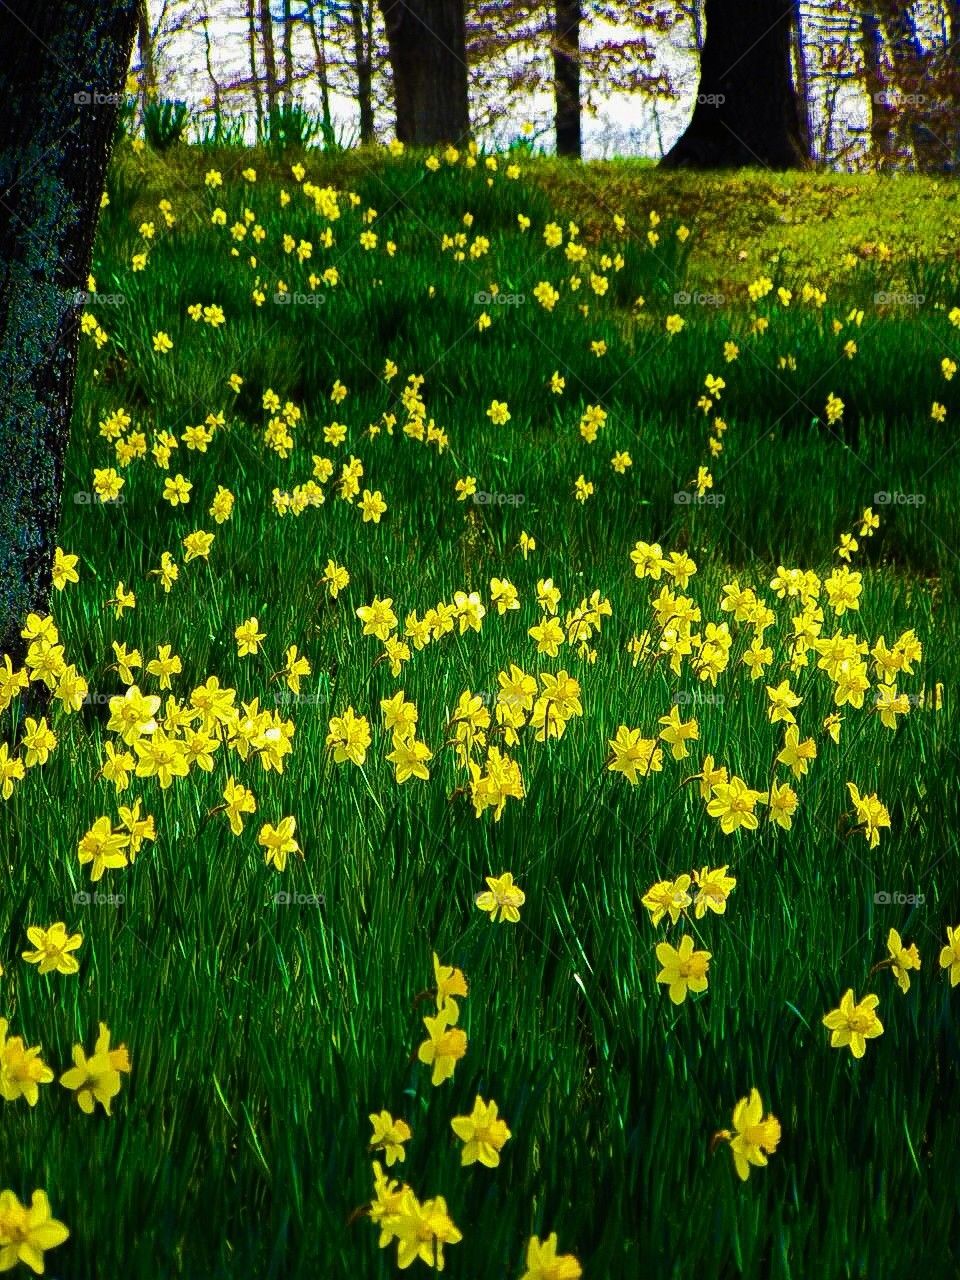 Daffodils creeping up the hill